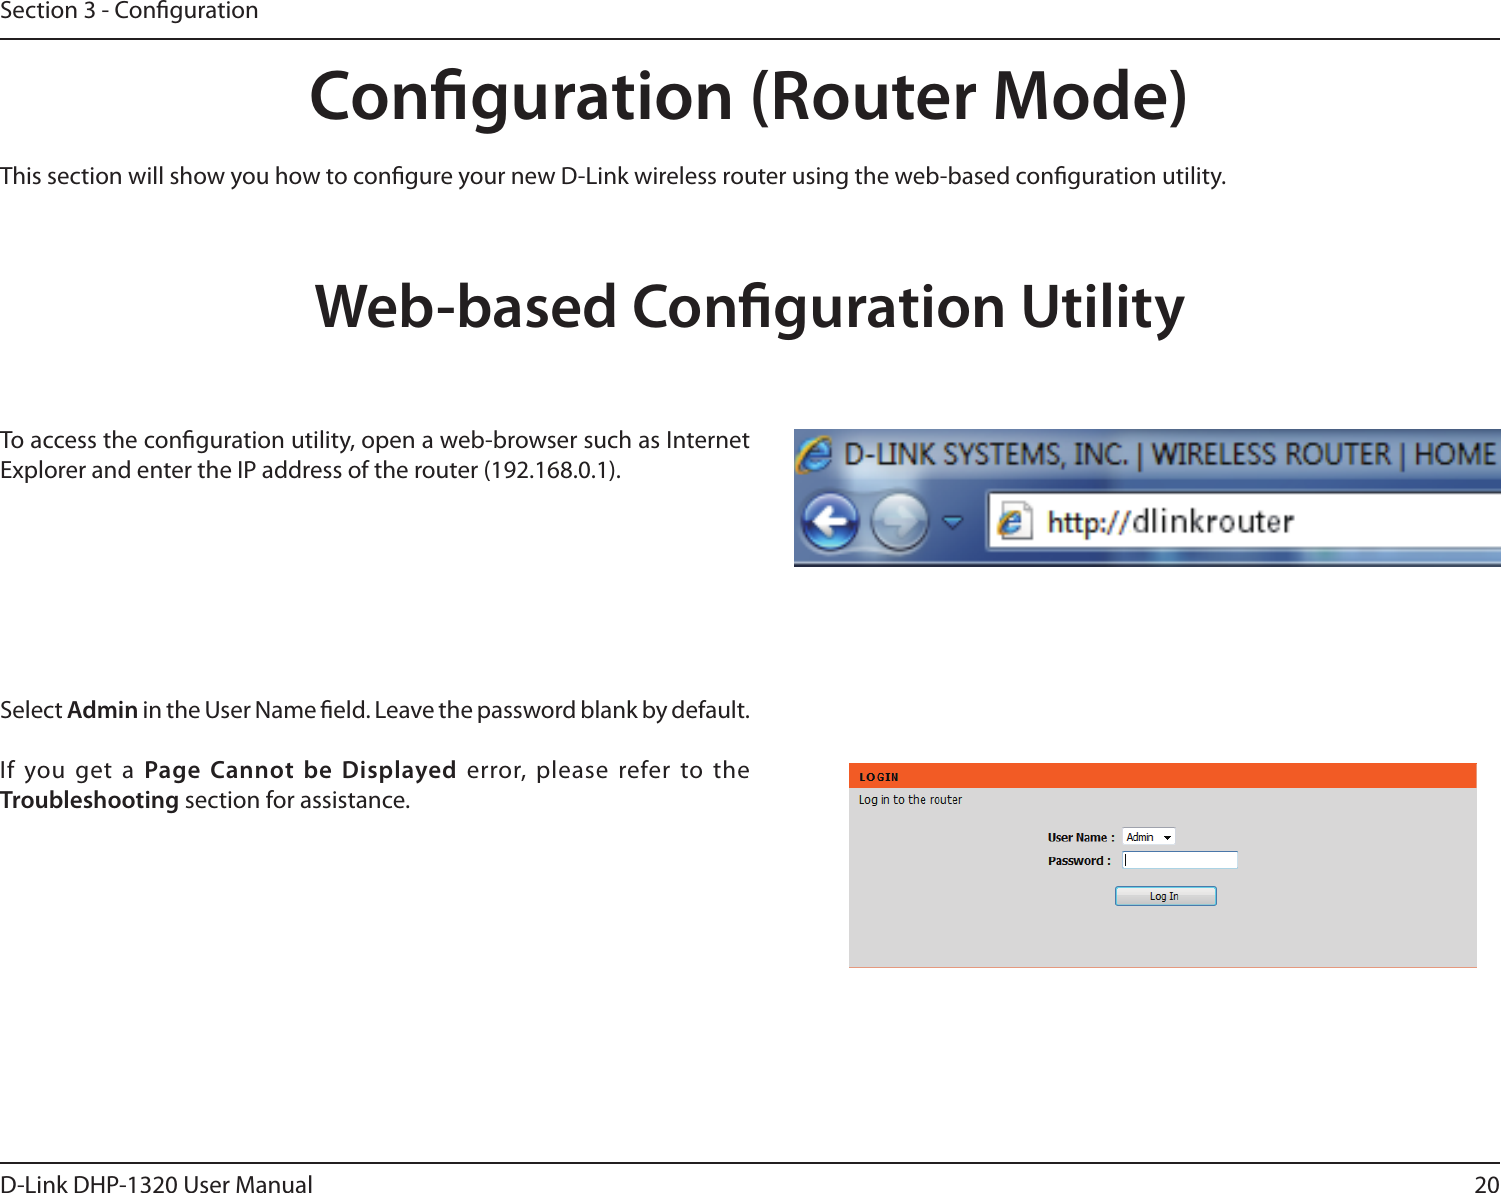 20D-Link DHP-1320 User ManualSection 3 - CongurationConguration (Router Mode)This section will show you how to congure your new D-Link wireless router using the web-based conguration utility.Web-based Conguration UtilityTo access the conguration utility, open a web-browser such as Internet Explorer and enter the IP address of the router (192.168.0.1).Select Admin in the User Name eld. Leave the password blank by default. If you get a  Page Cannot be  Displayed error,  please  refer to the Troubleshooting section for assistance.